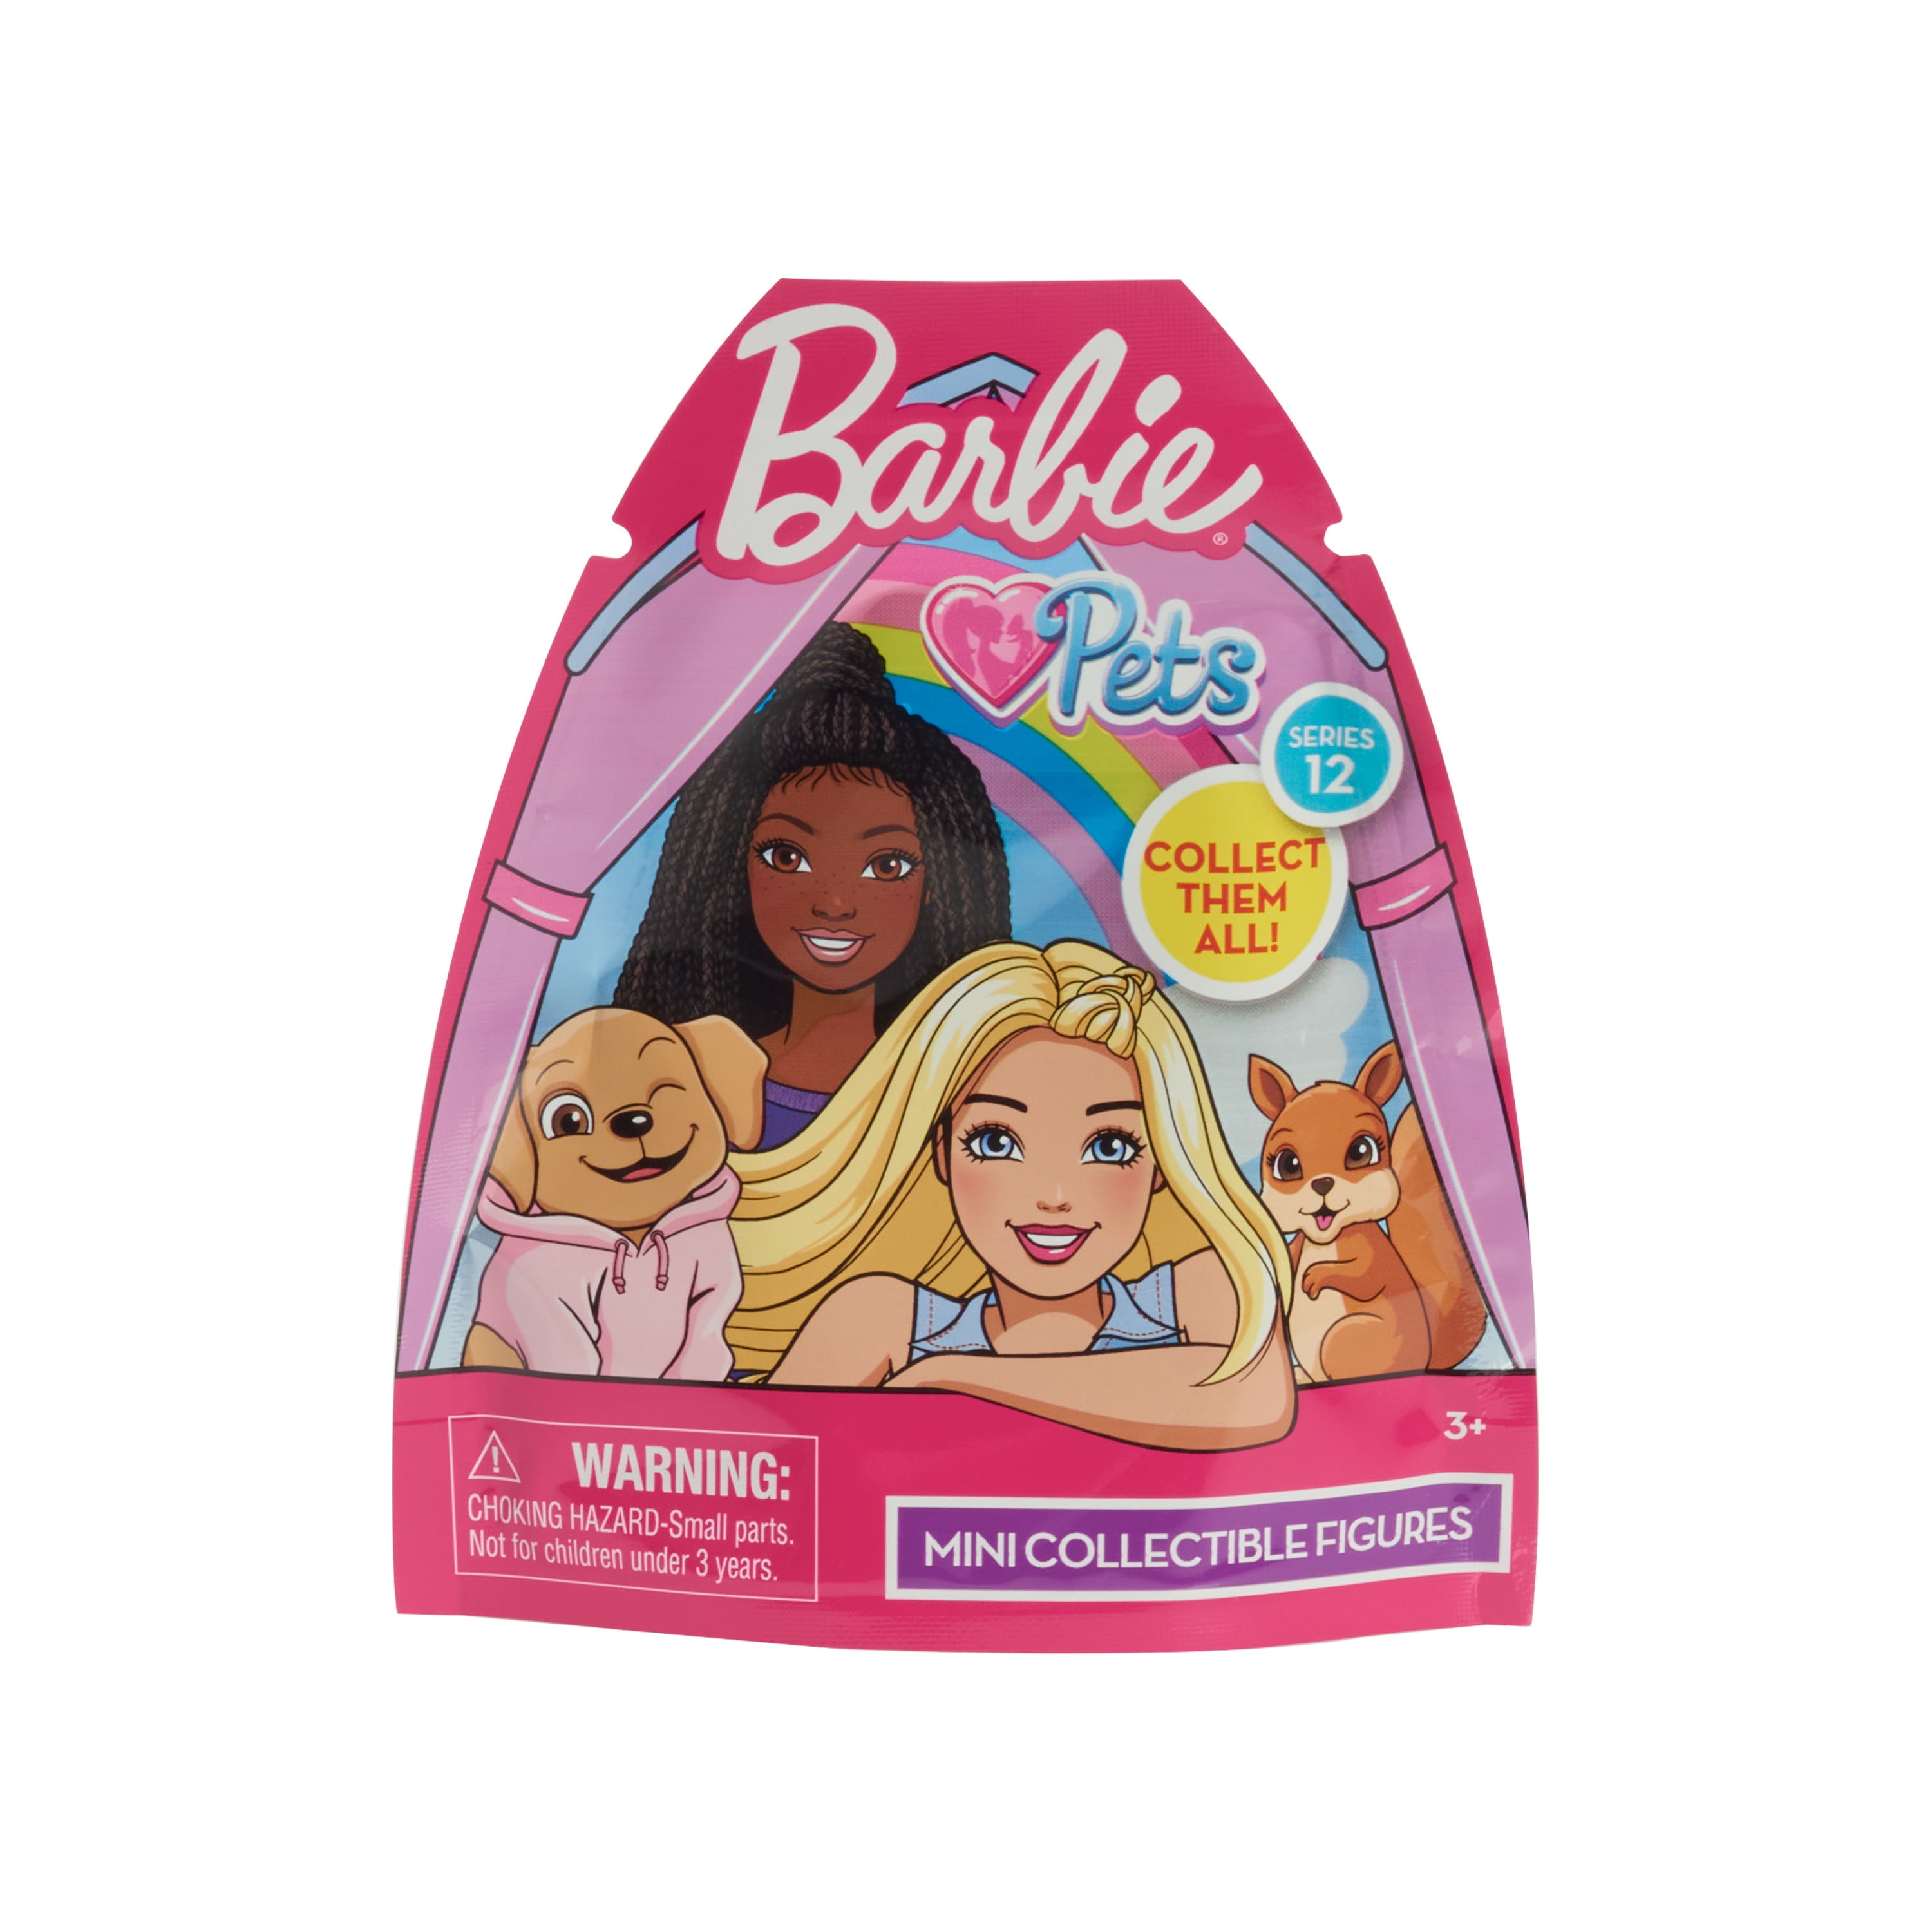 Barbie Pet Blind Bag, Series 10, Includes 1 Pet Figure, Styles May Vary,  Kids Toys for Ages 3 Up, Gifts and Presents